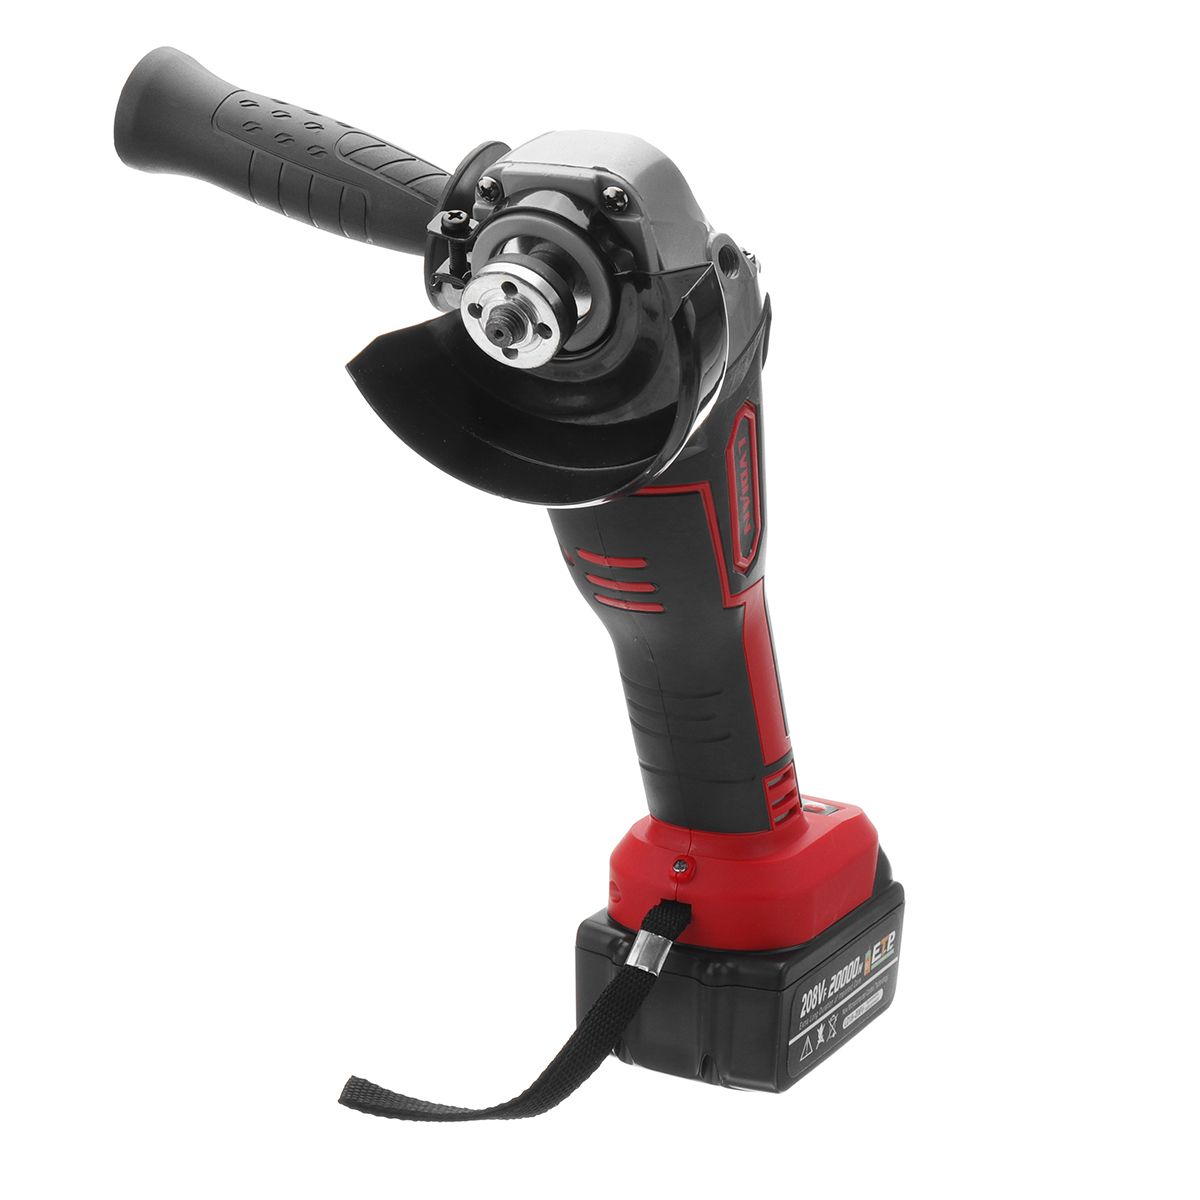 110-220V-22000rpm-Cordless-Electric-Angle-Grinder-Power-Cutting-Tool-with--Auxiliary-Handle-Charger--1711682